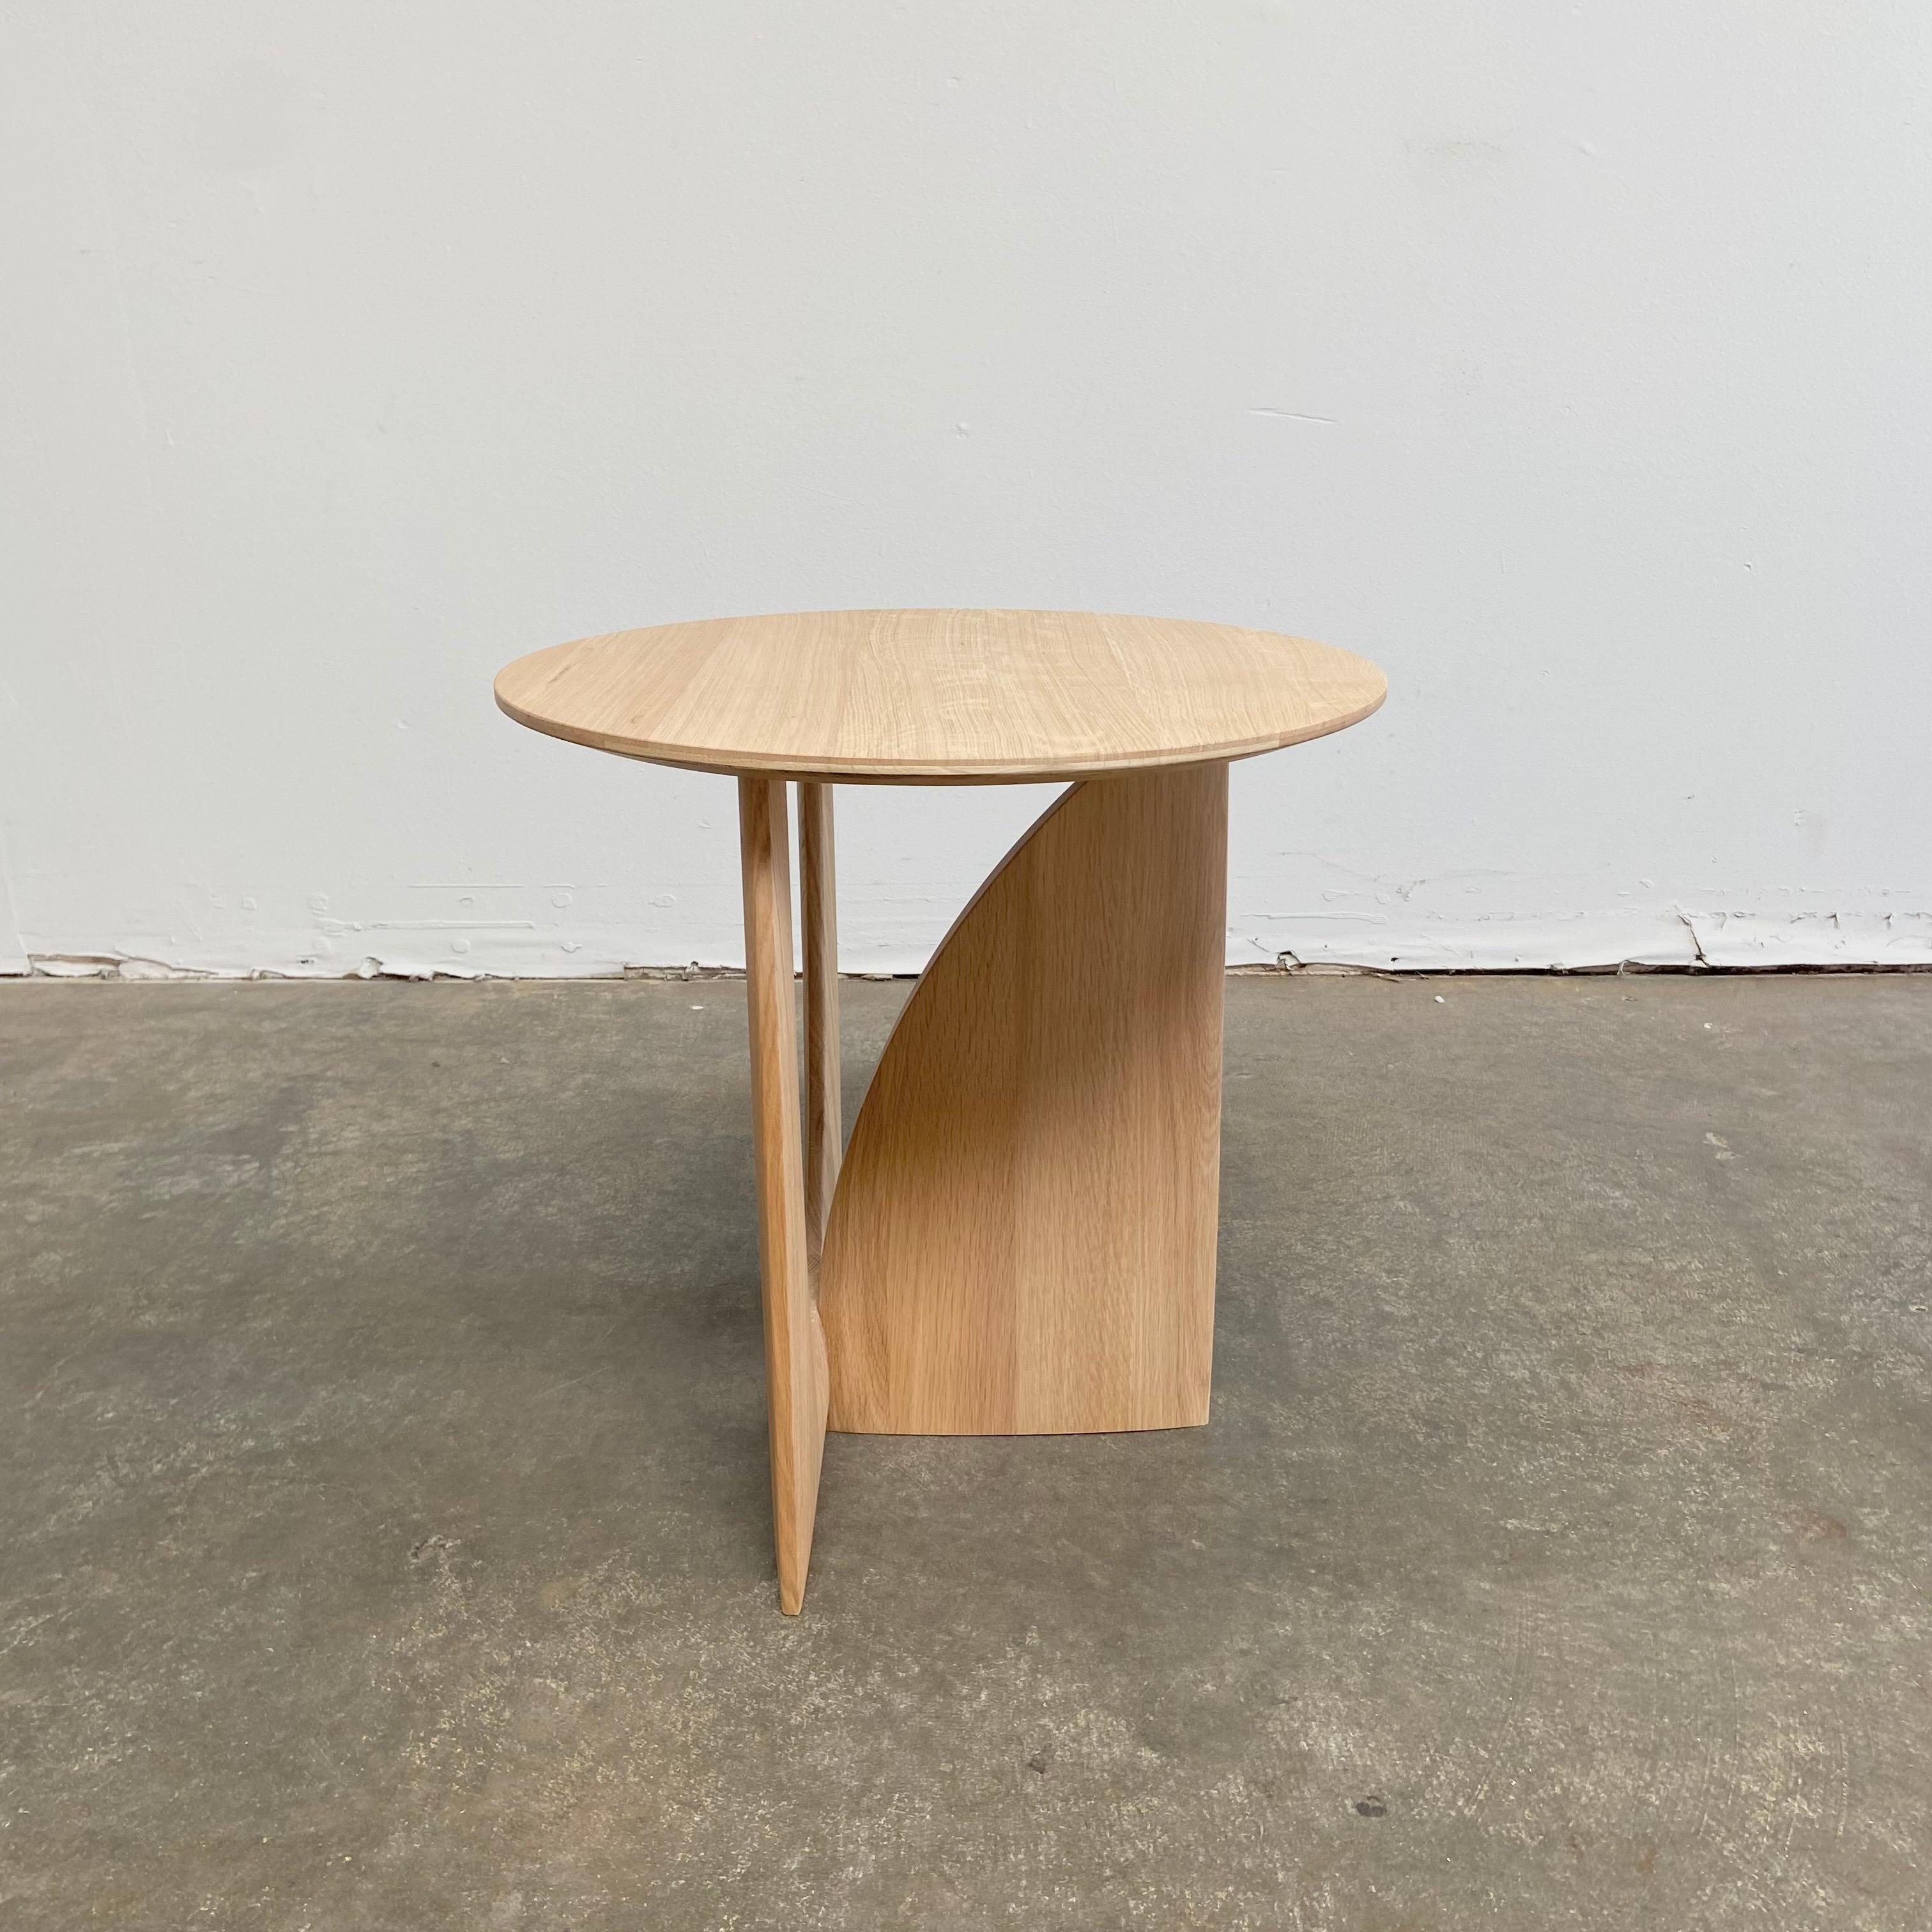 Tables / side tables

Oak geometric side table
By intersecting geometrical shapes and creating interaction, designer Alain van Havre found something new. From any angle, the side table does not only look different, it also becomes